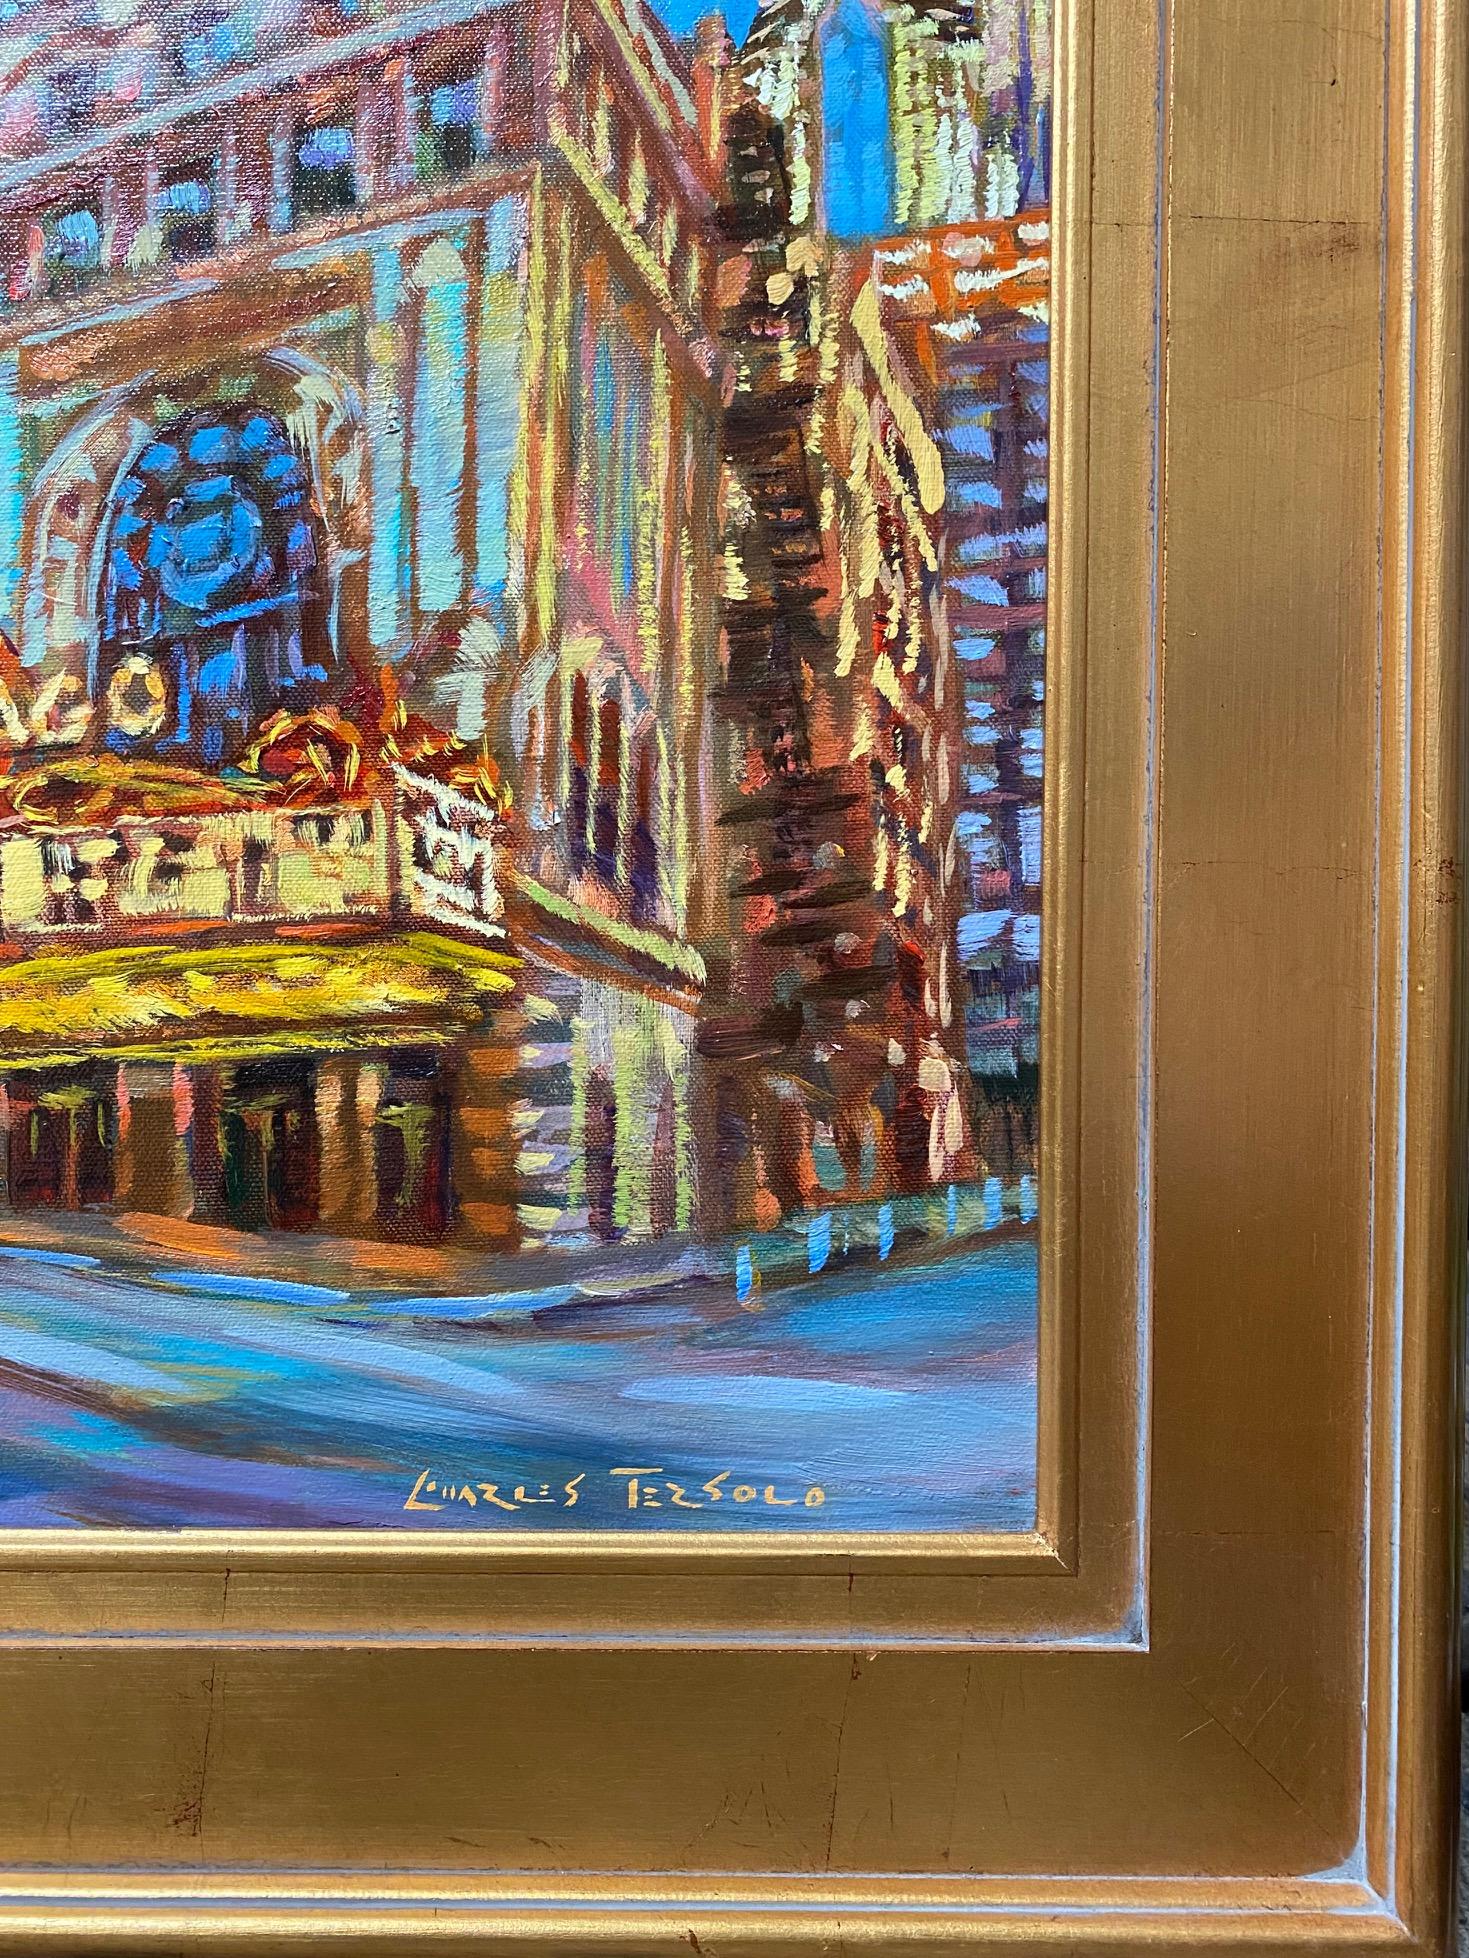 One of the greatest and most famous American urban landscapes, Chicago is bold, brassy, diverse and wild, resplendent with the latest theatrical productions, live music performances and diverse social trends!  Artist Charles Tersolo has captured the